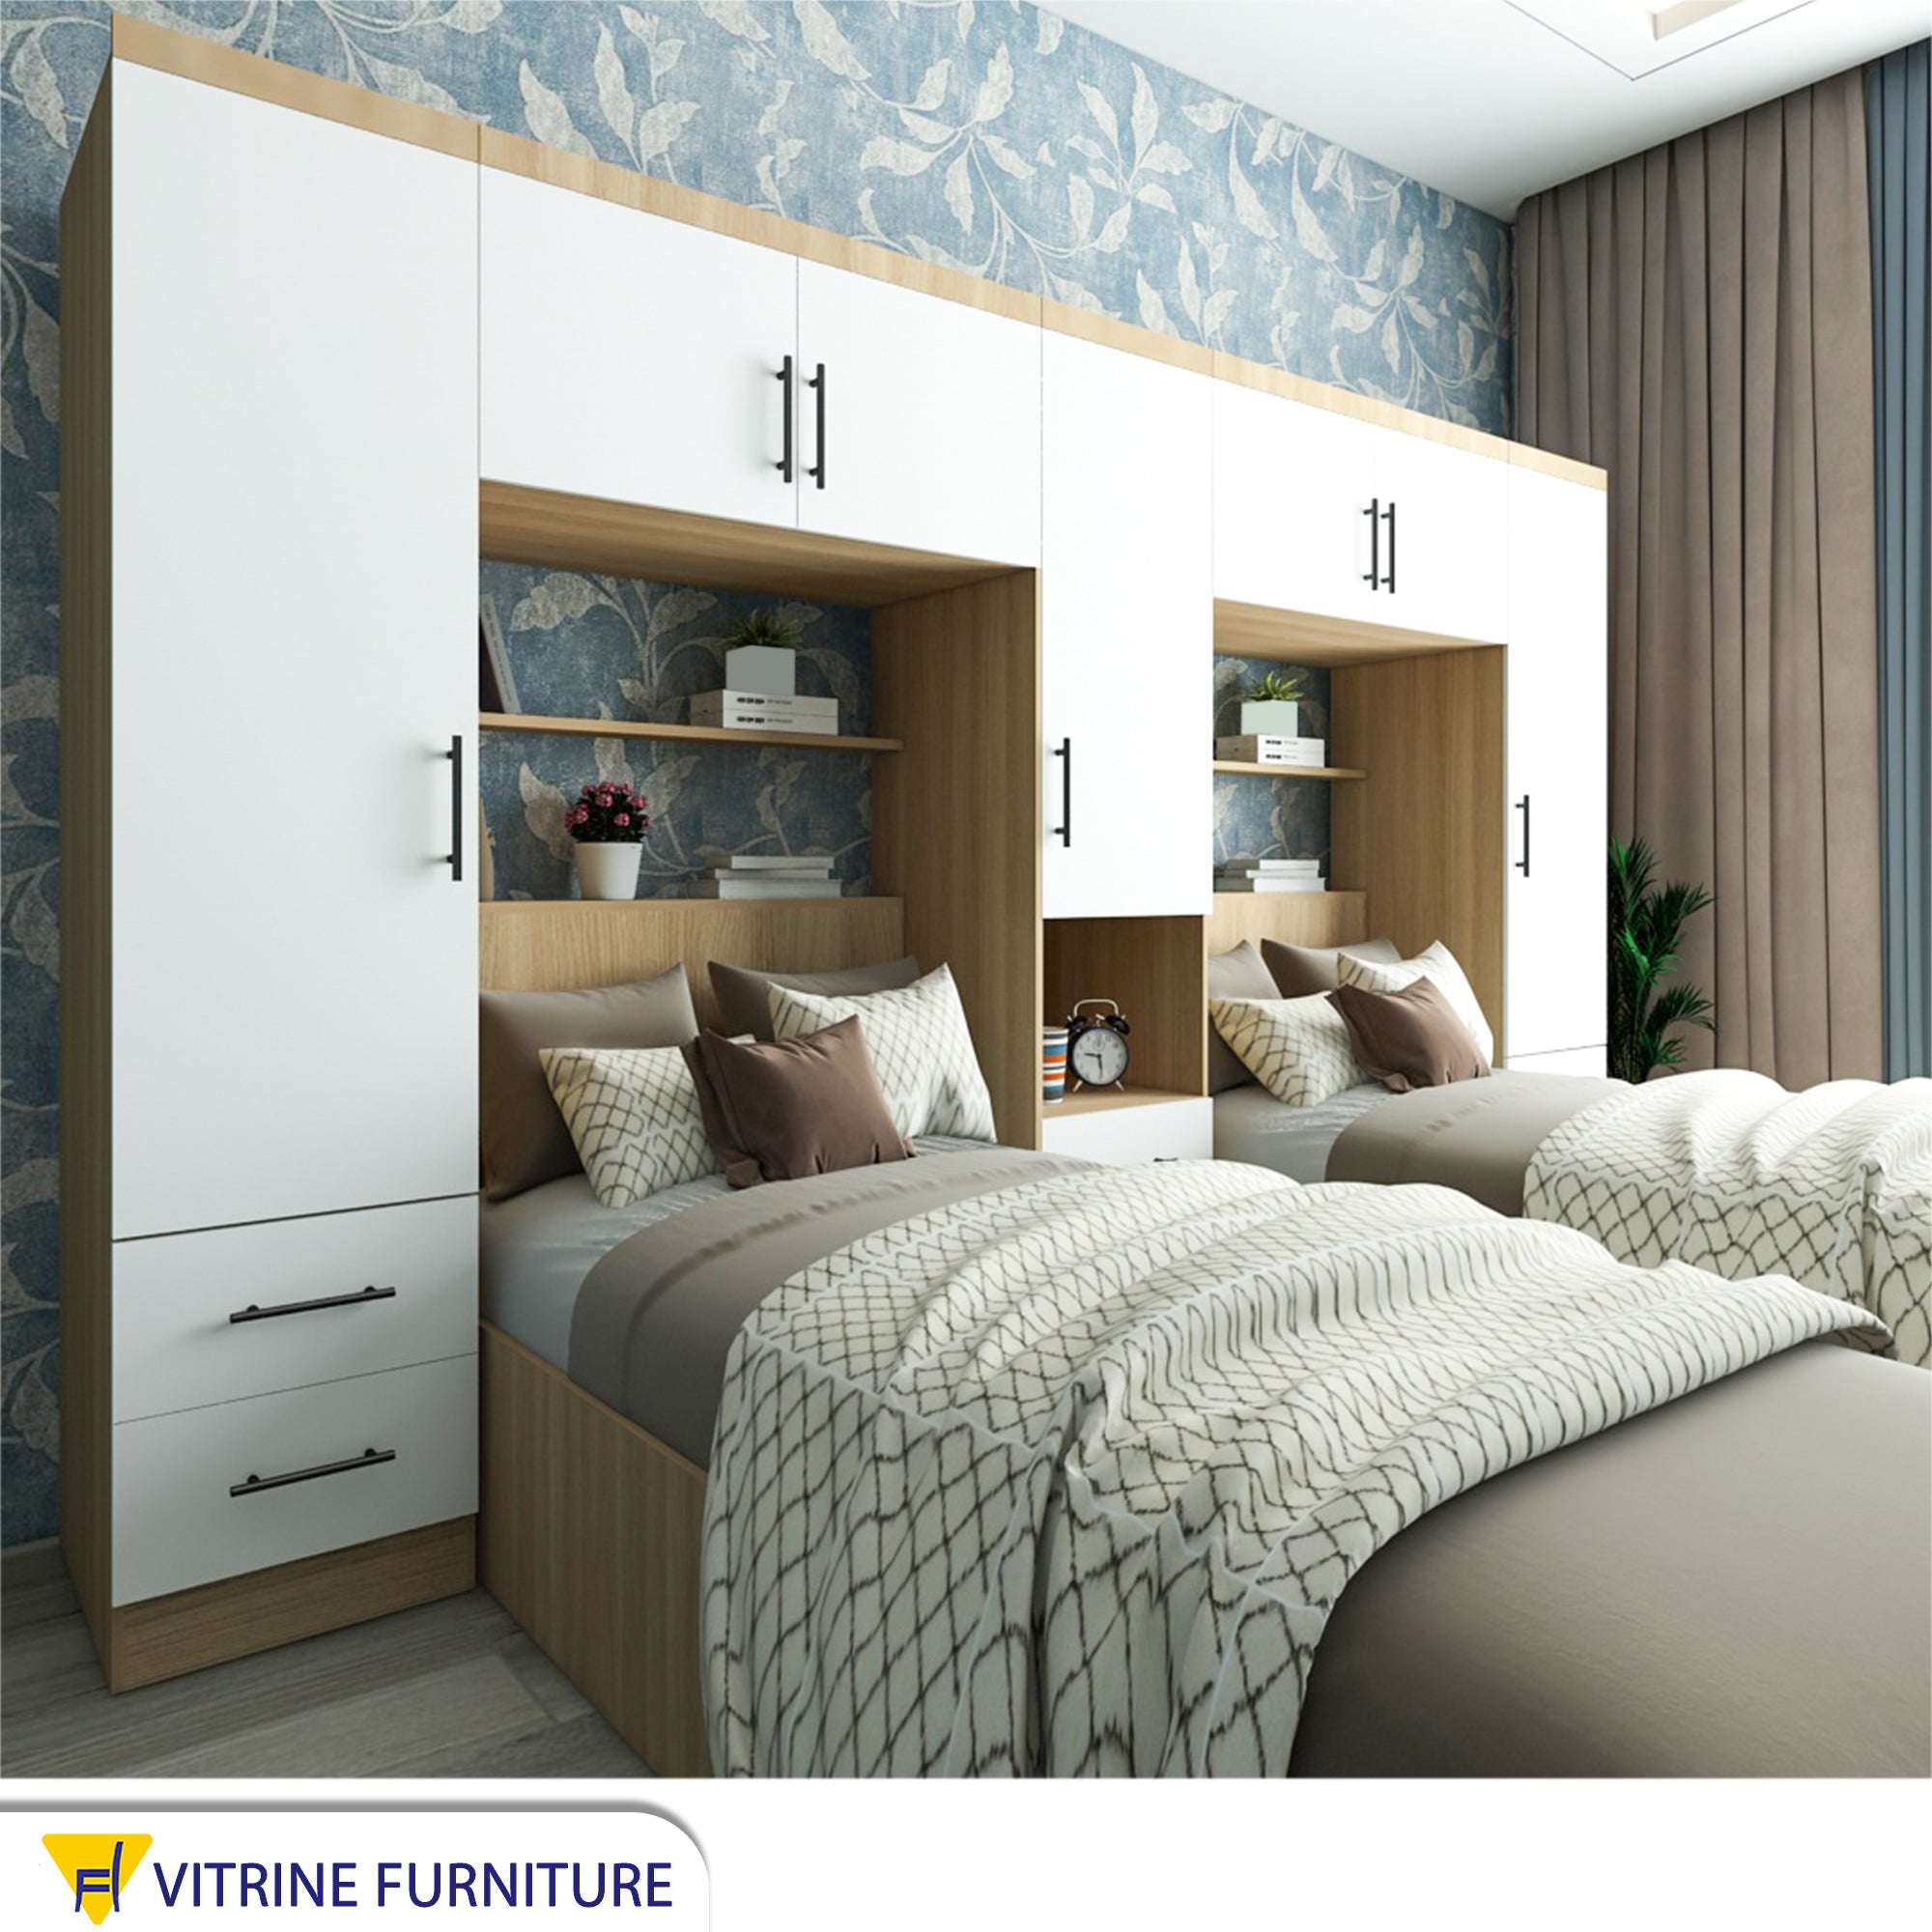 Bedroom with two wooden Beige beds and a large wardrobe